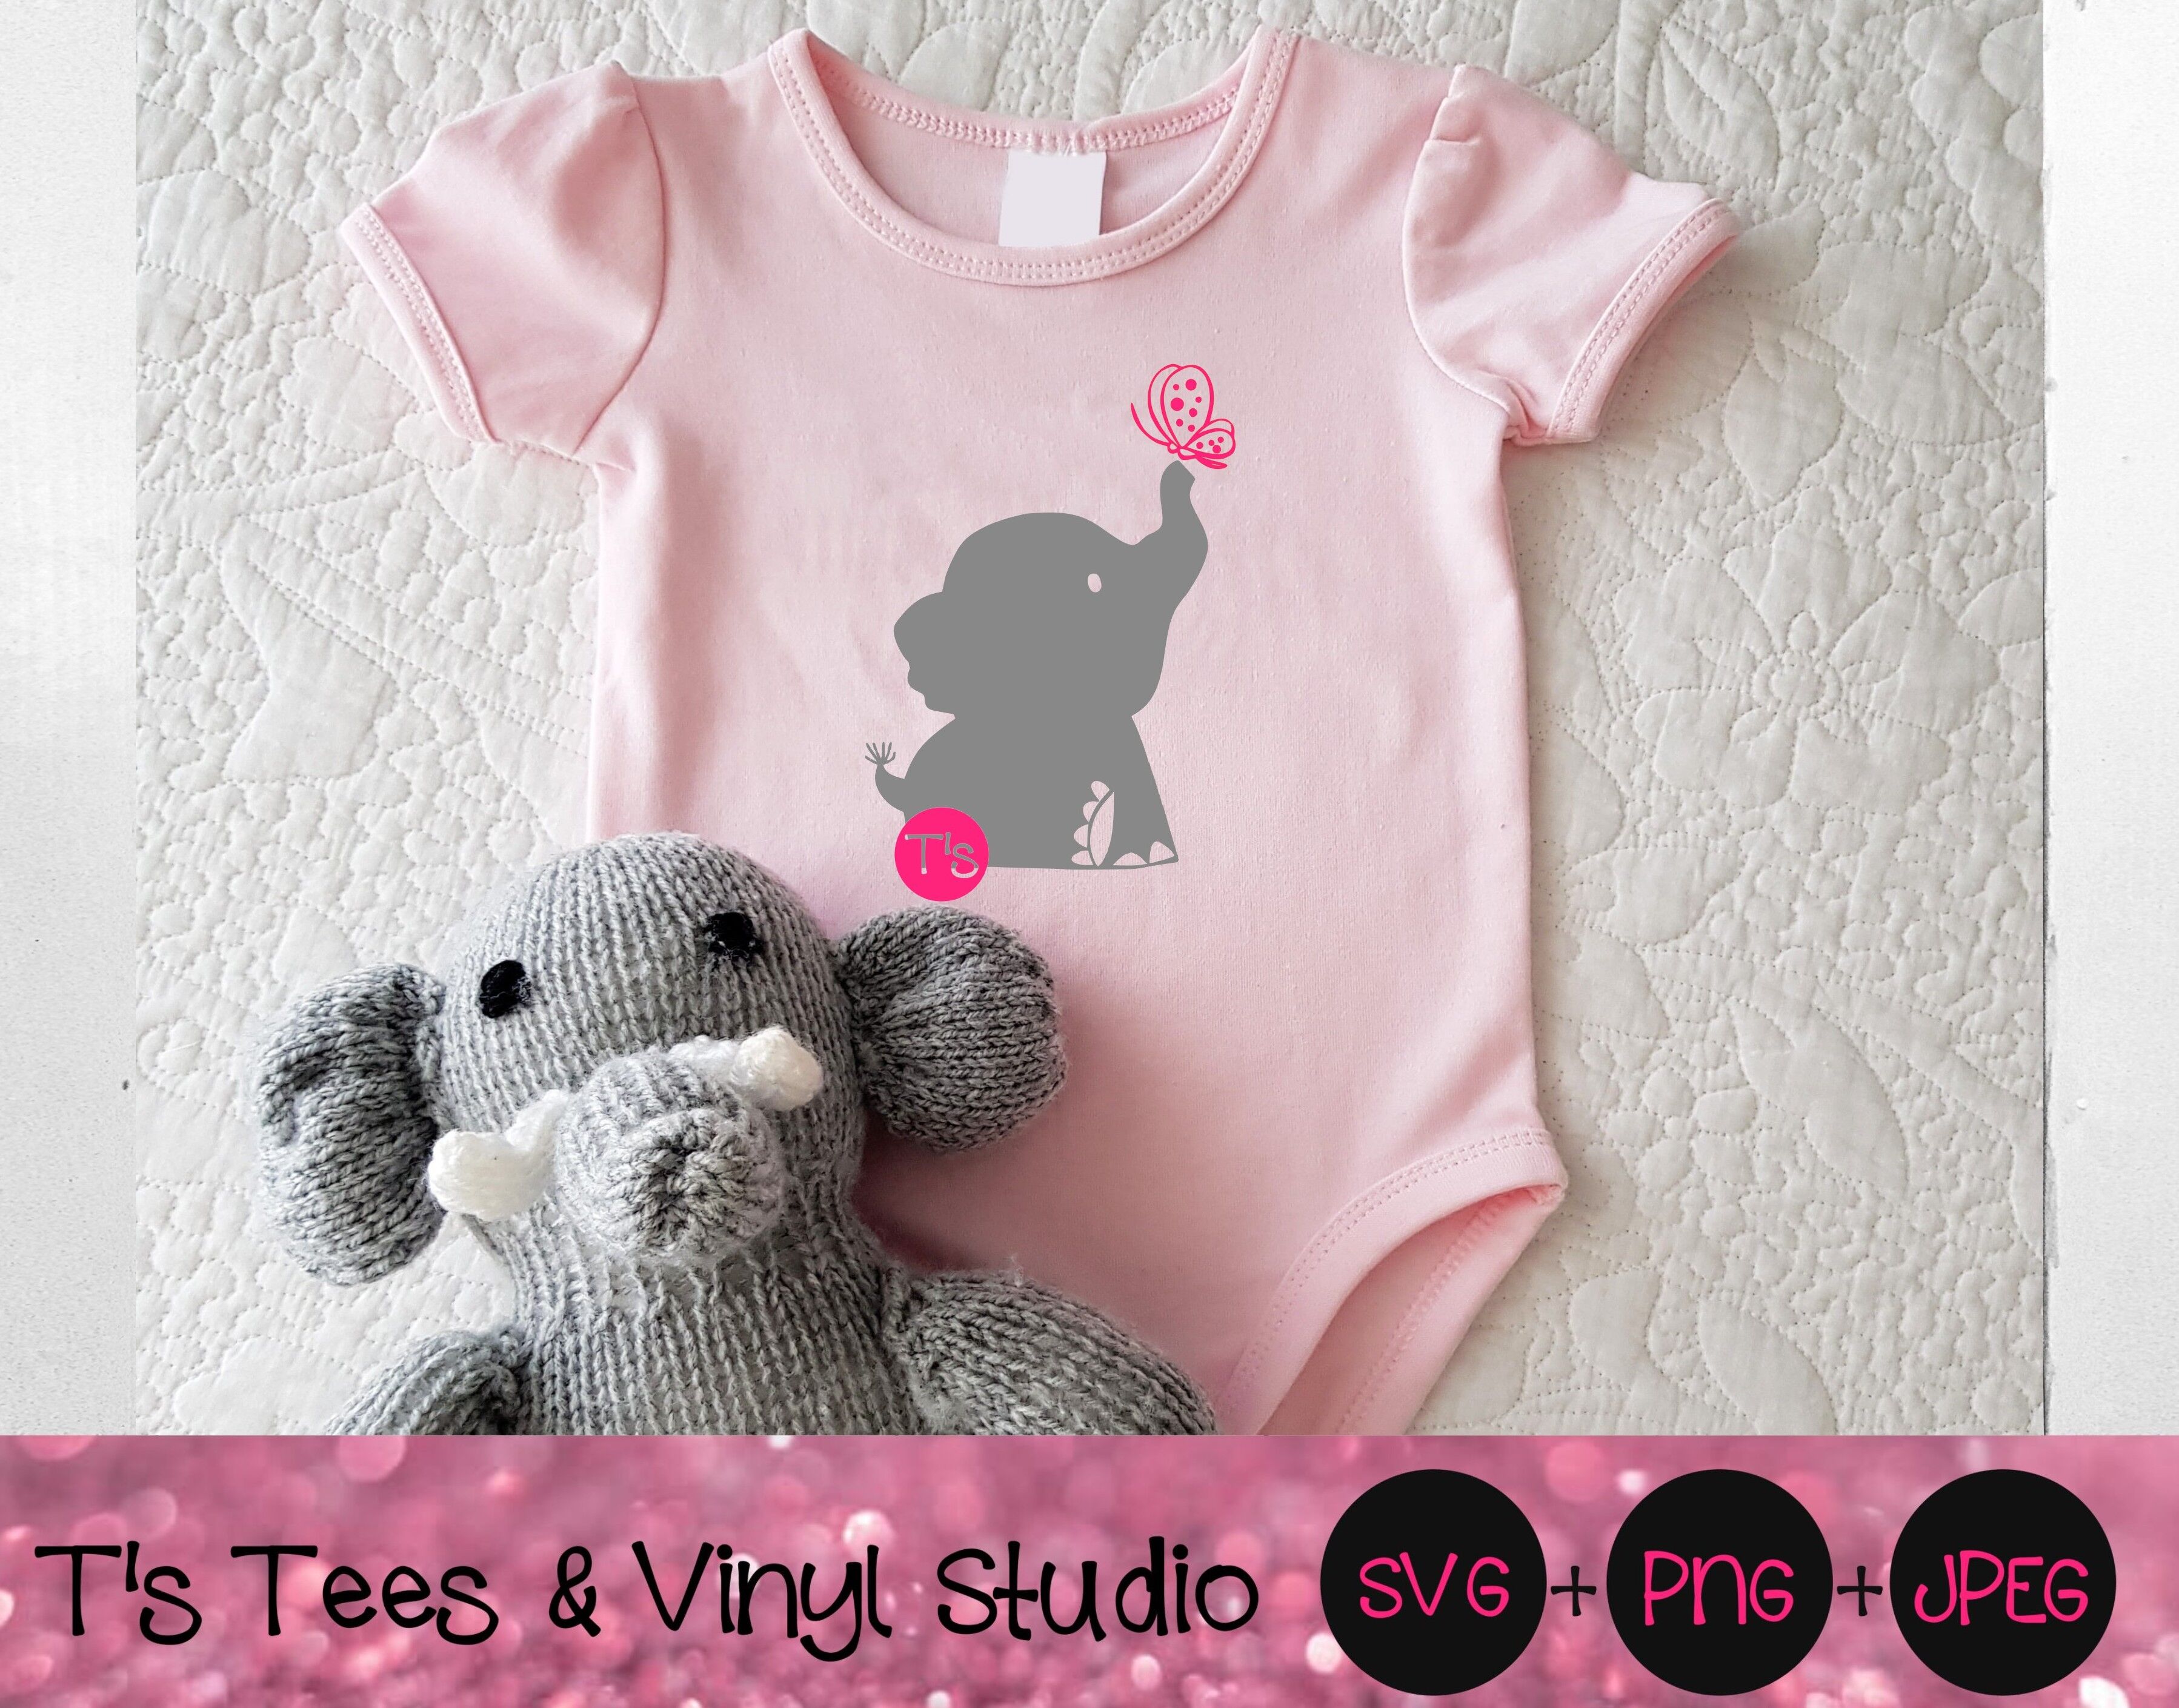 Download Elephant Svg Butterfly Svg Elephant With Butterfly Svg Baby Elephan By T S Tees Vinyl Studio Thehungryjpeg Com